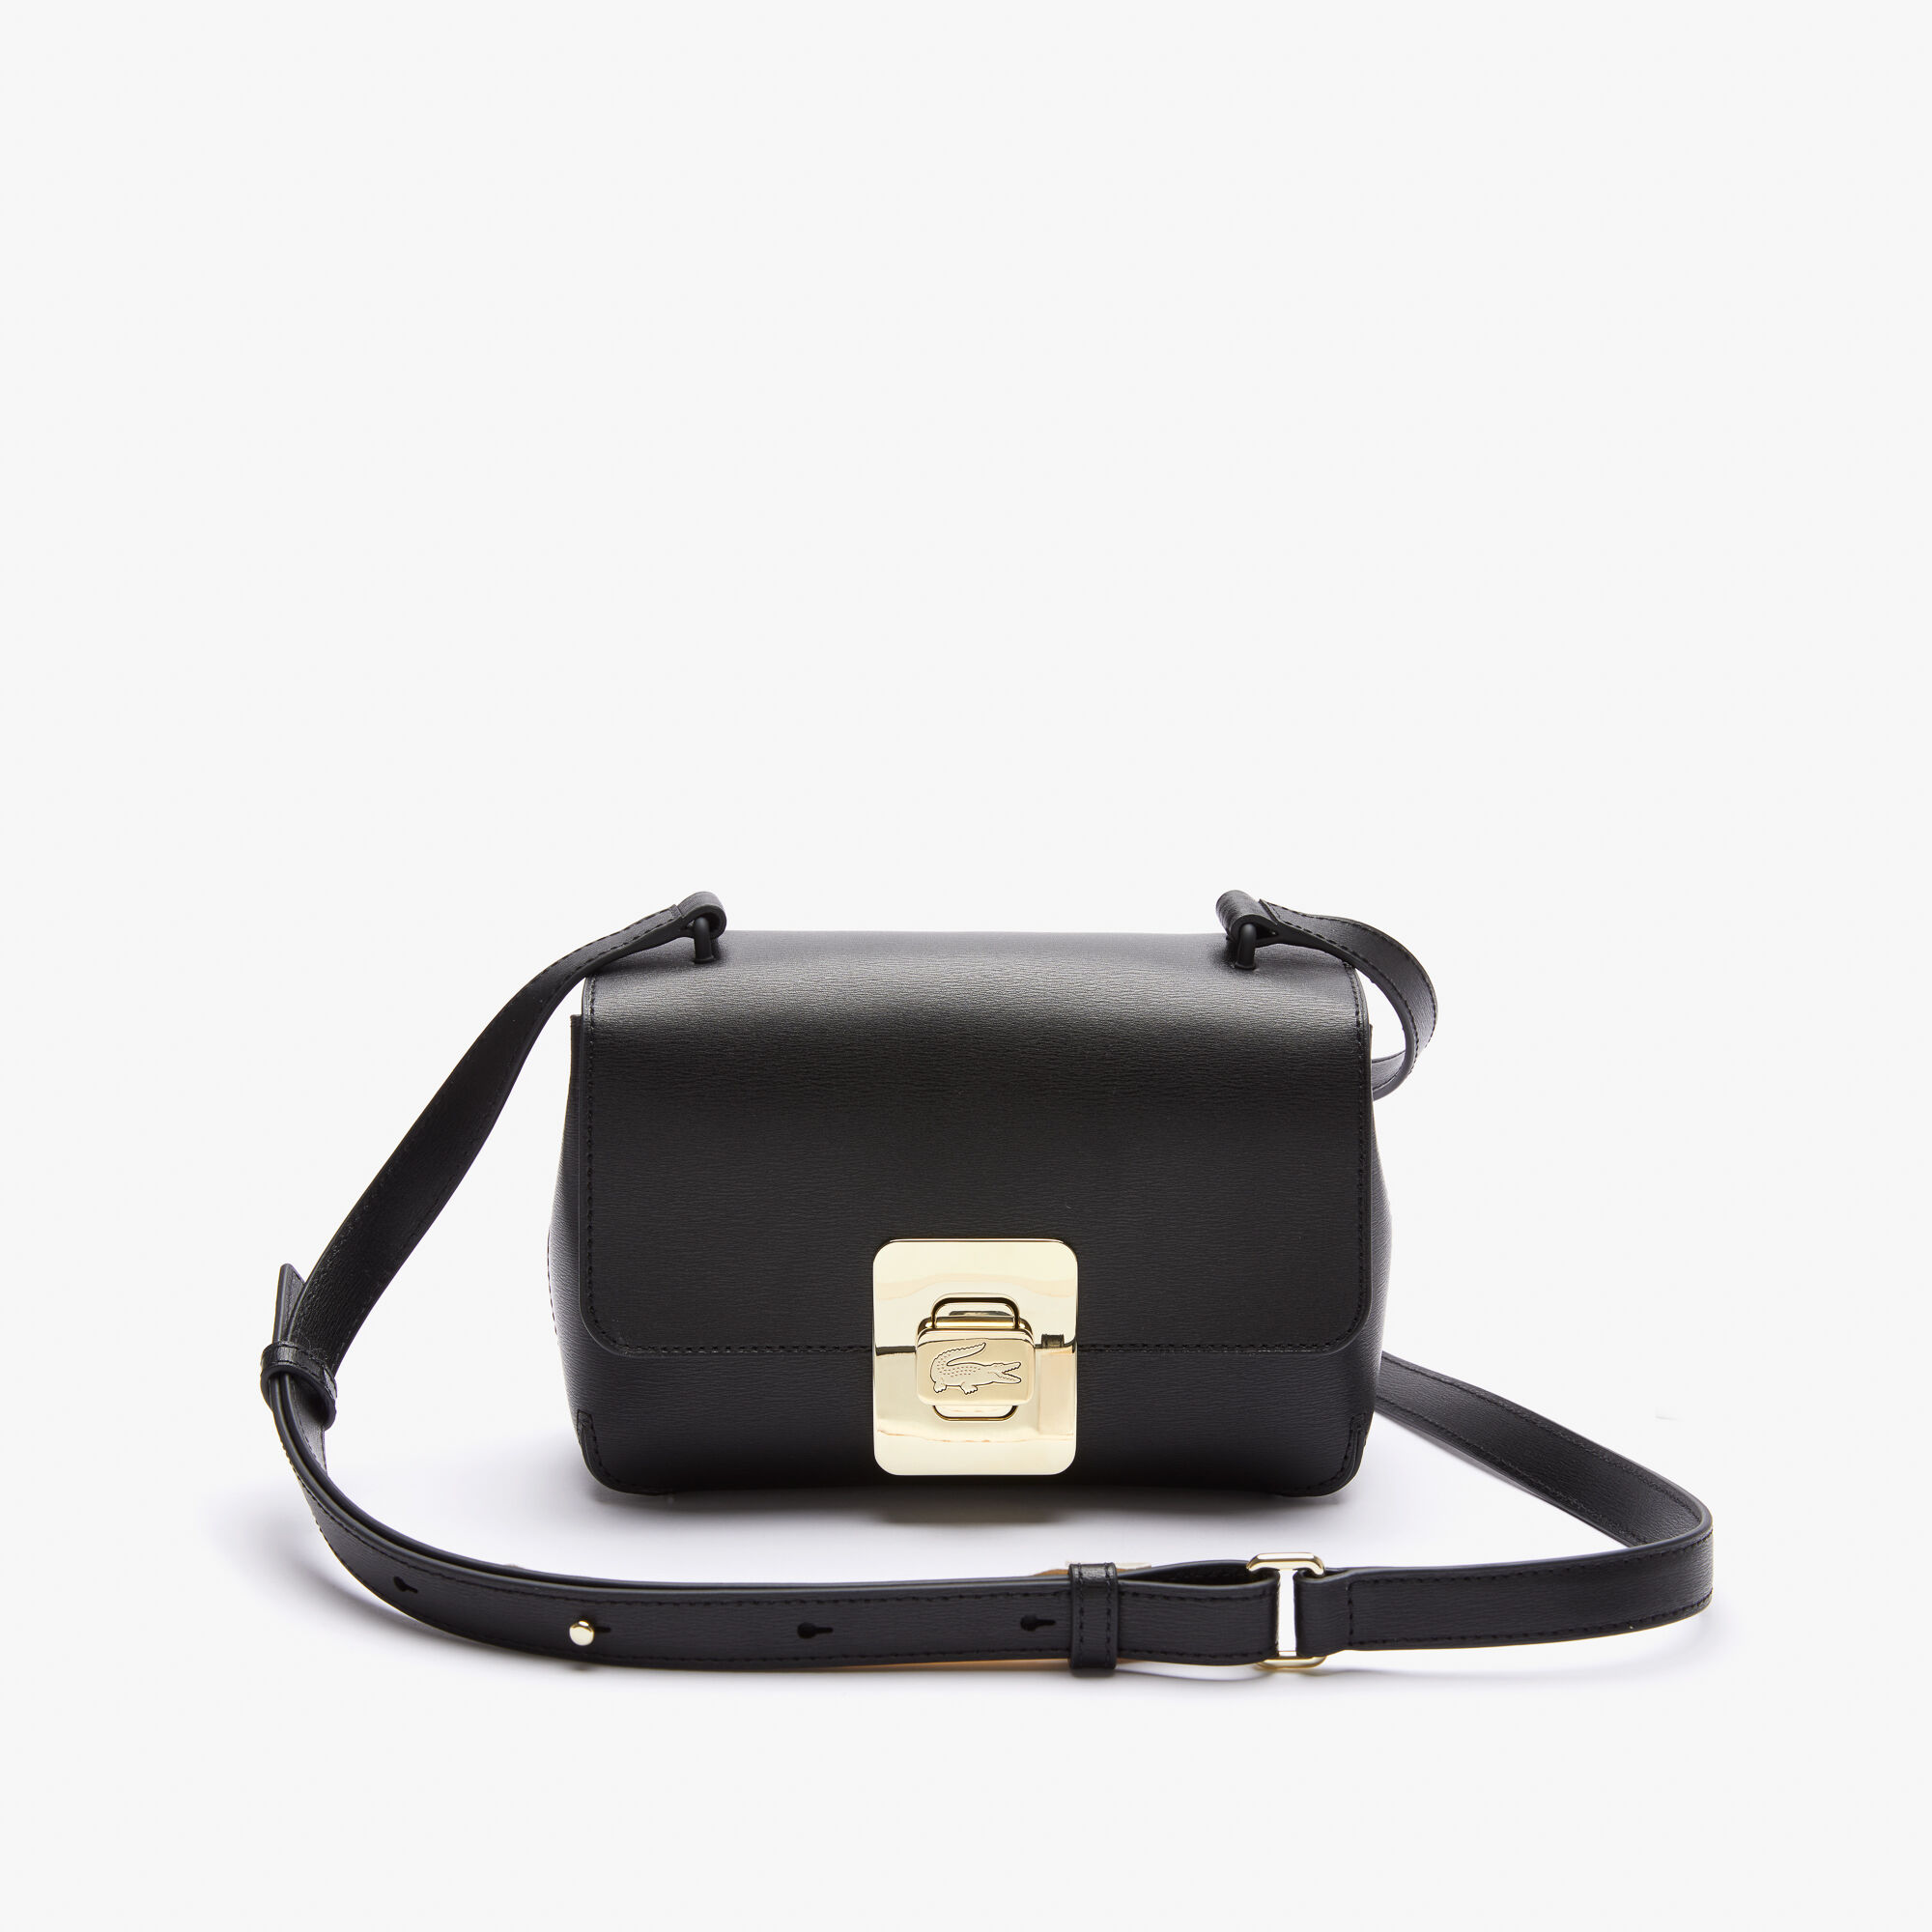 Women's Leather Goods | Buy Women's Leather Products | Lacoste UAE